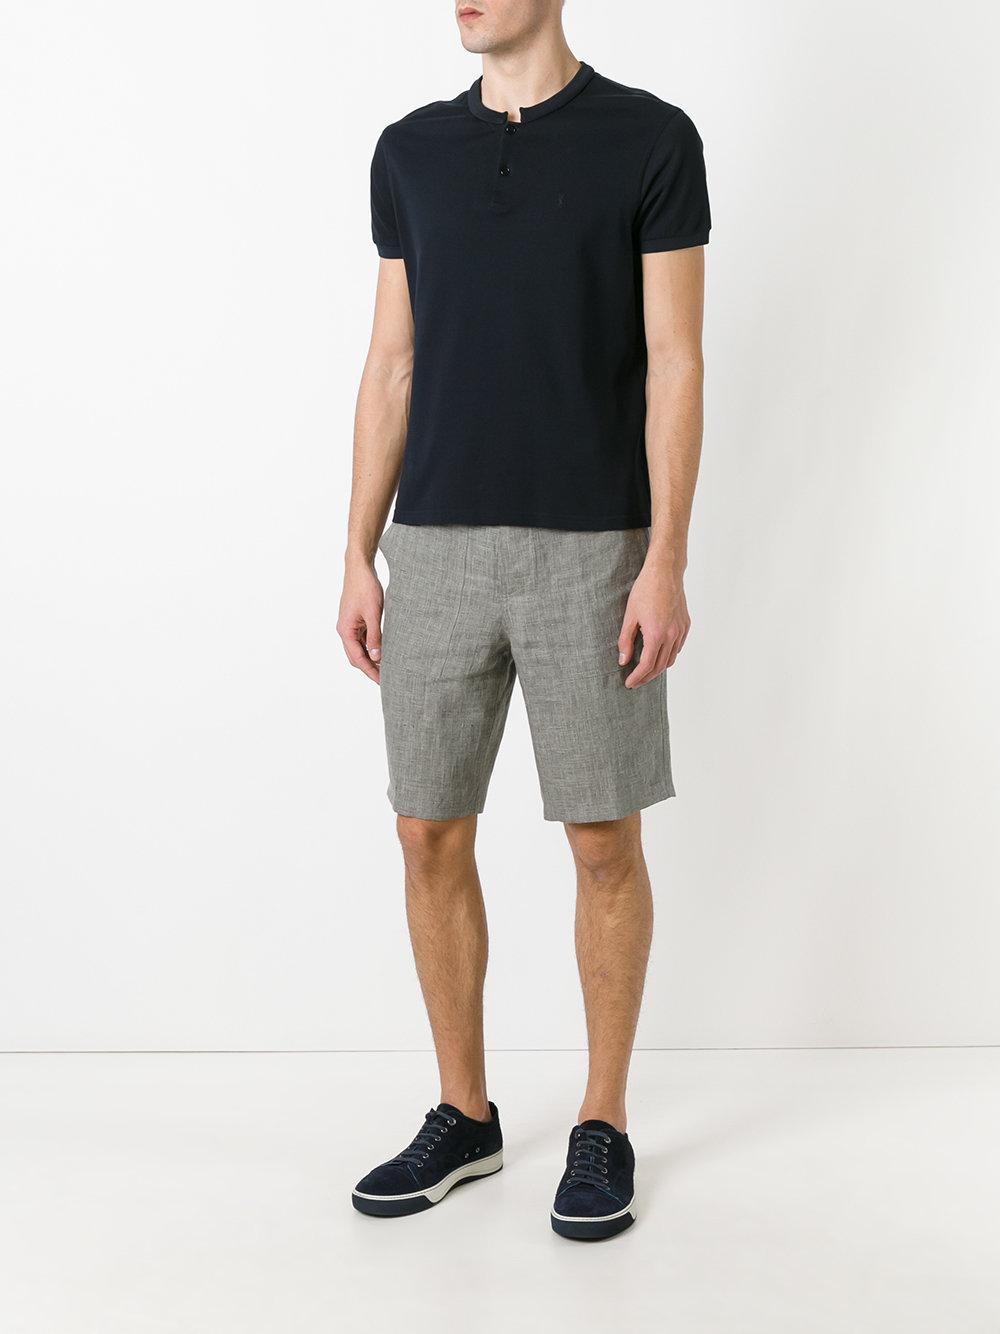 Lyst - Brunello Cucinelli Tailored Shorts in Green for Men